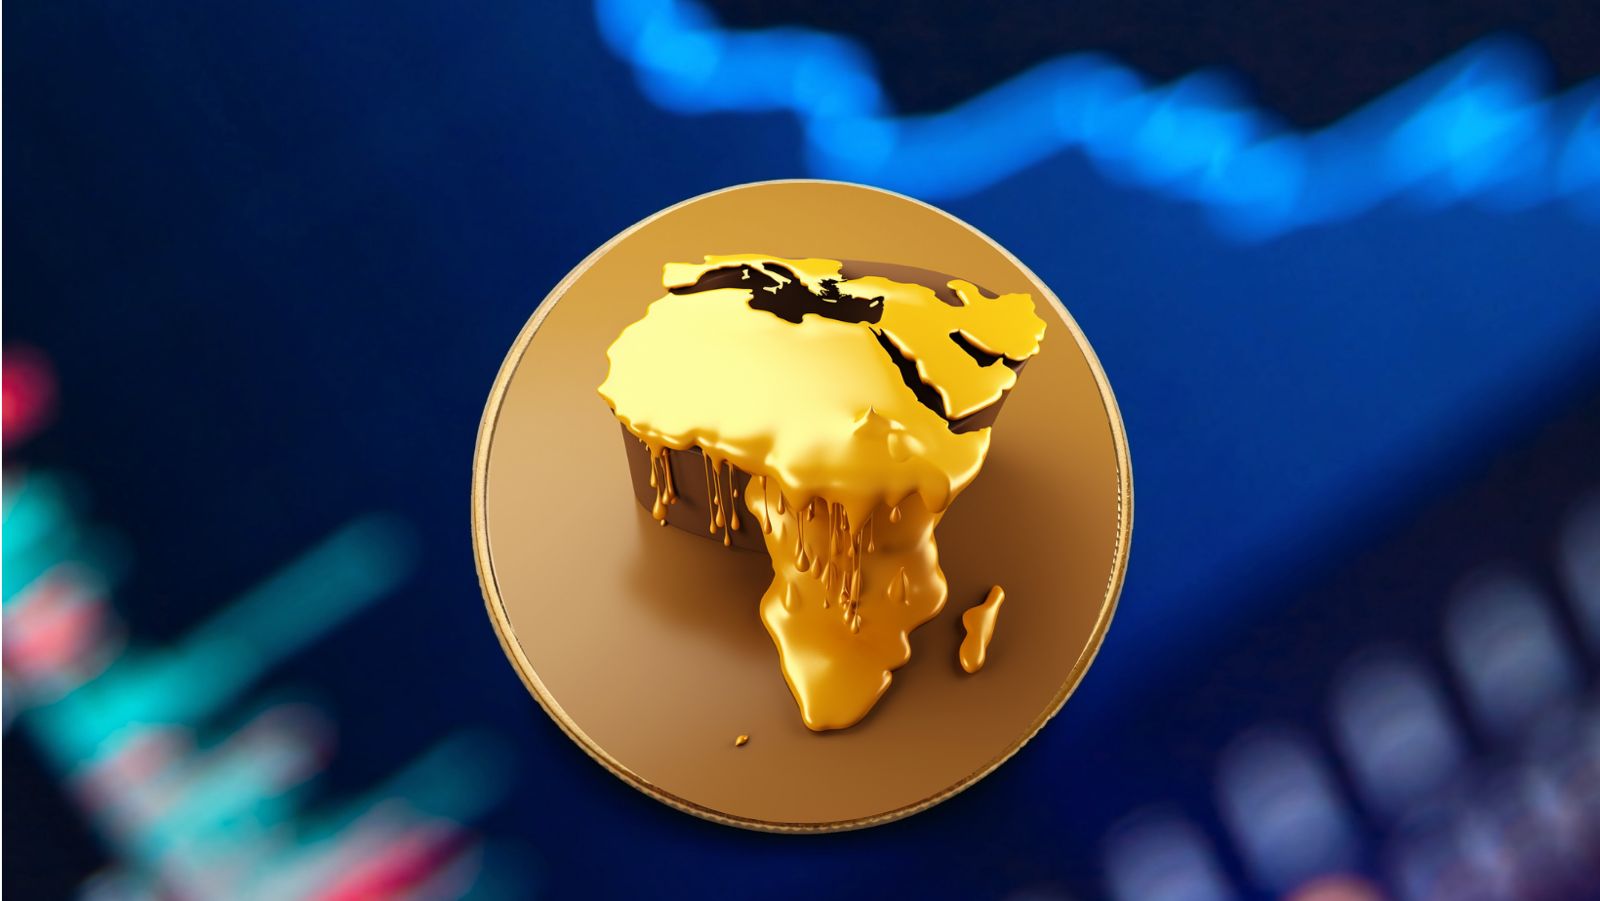 5 Countries Hold 56% of Africa’s Private Wealth